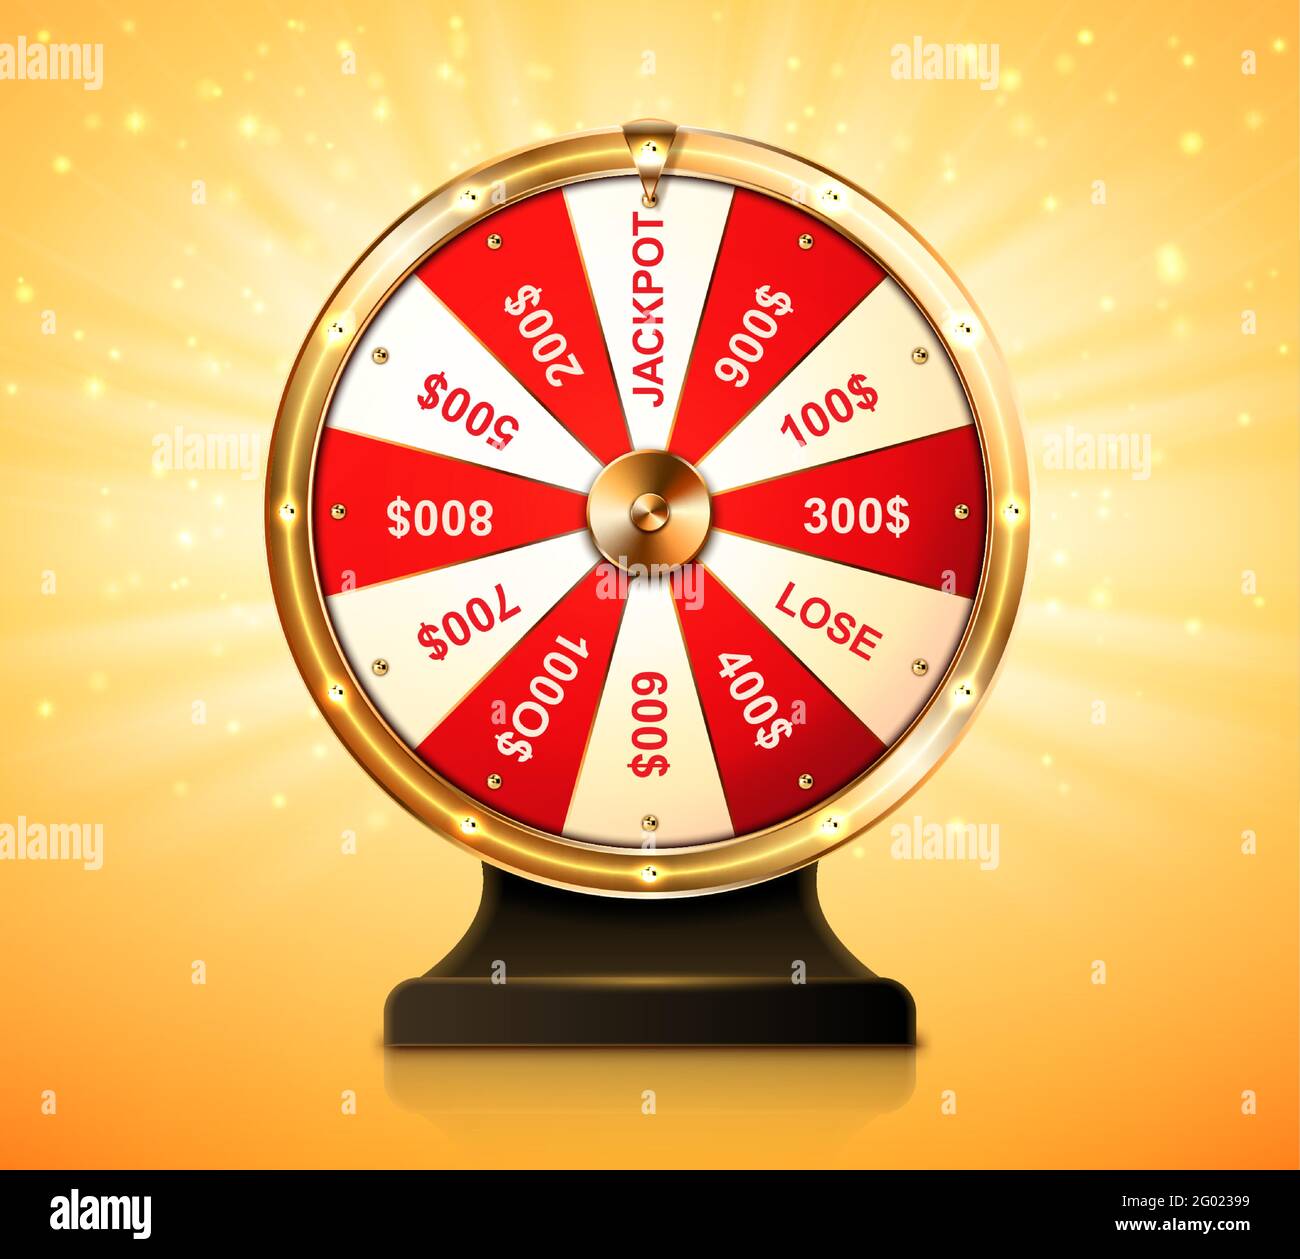 Golden wheel of fortune for lottery game or casino. Chance to win prize in lucky roulette. Vector realistic illustration of gold fortune wheel with money numbers and jackpot on shiny background Stock Vector